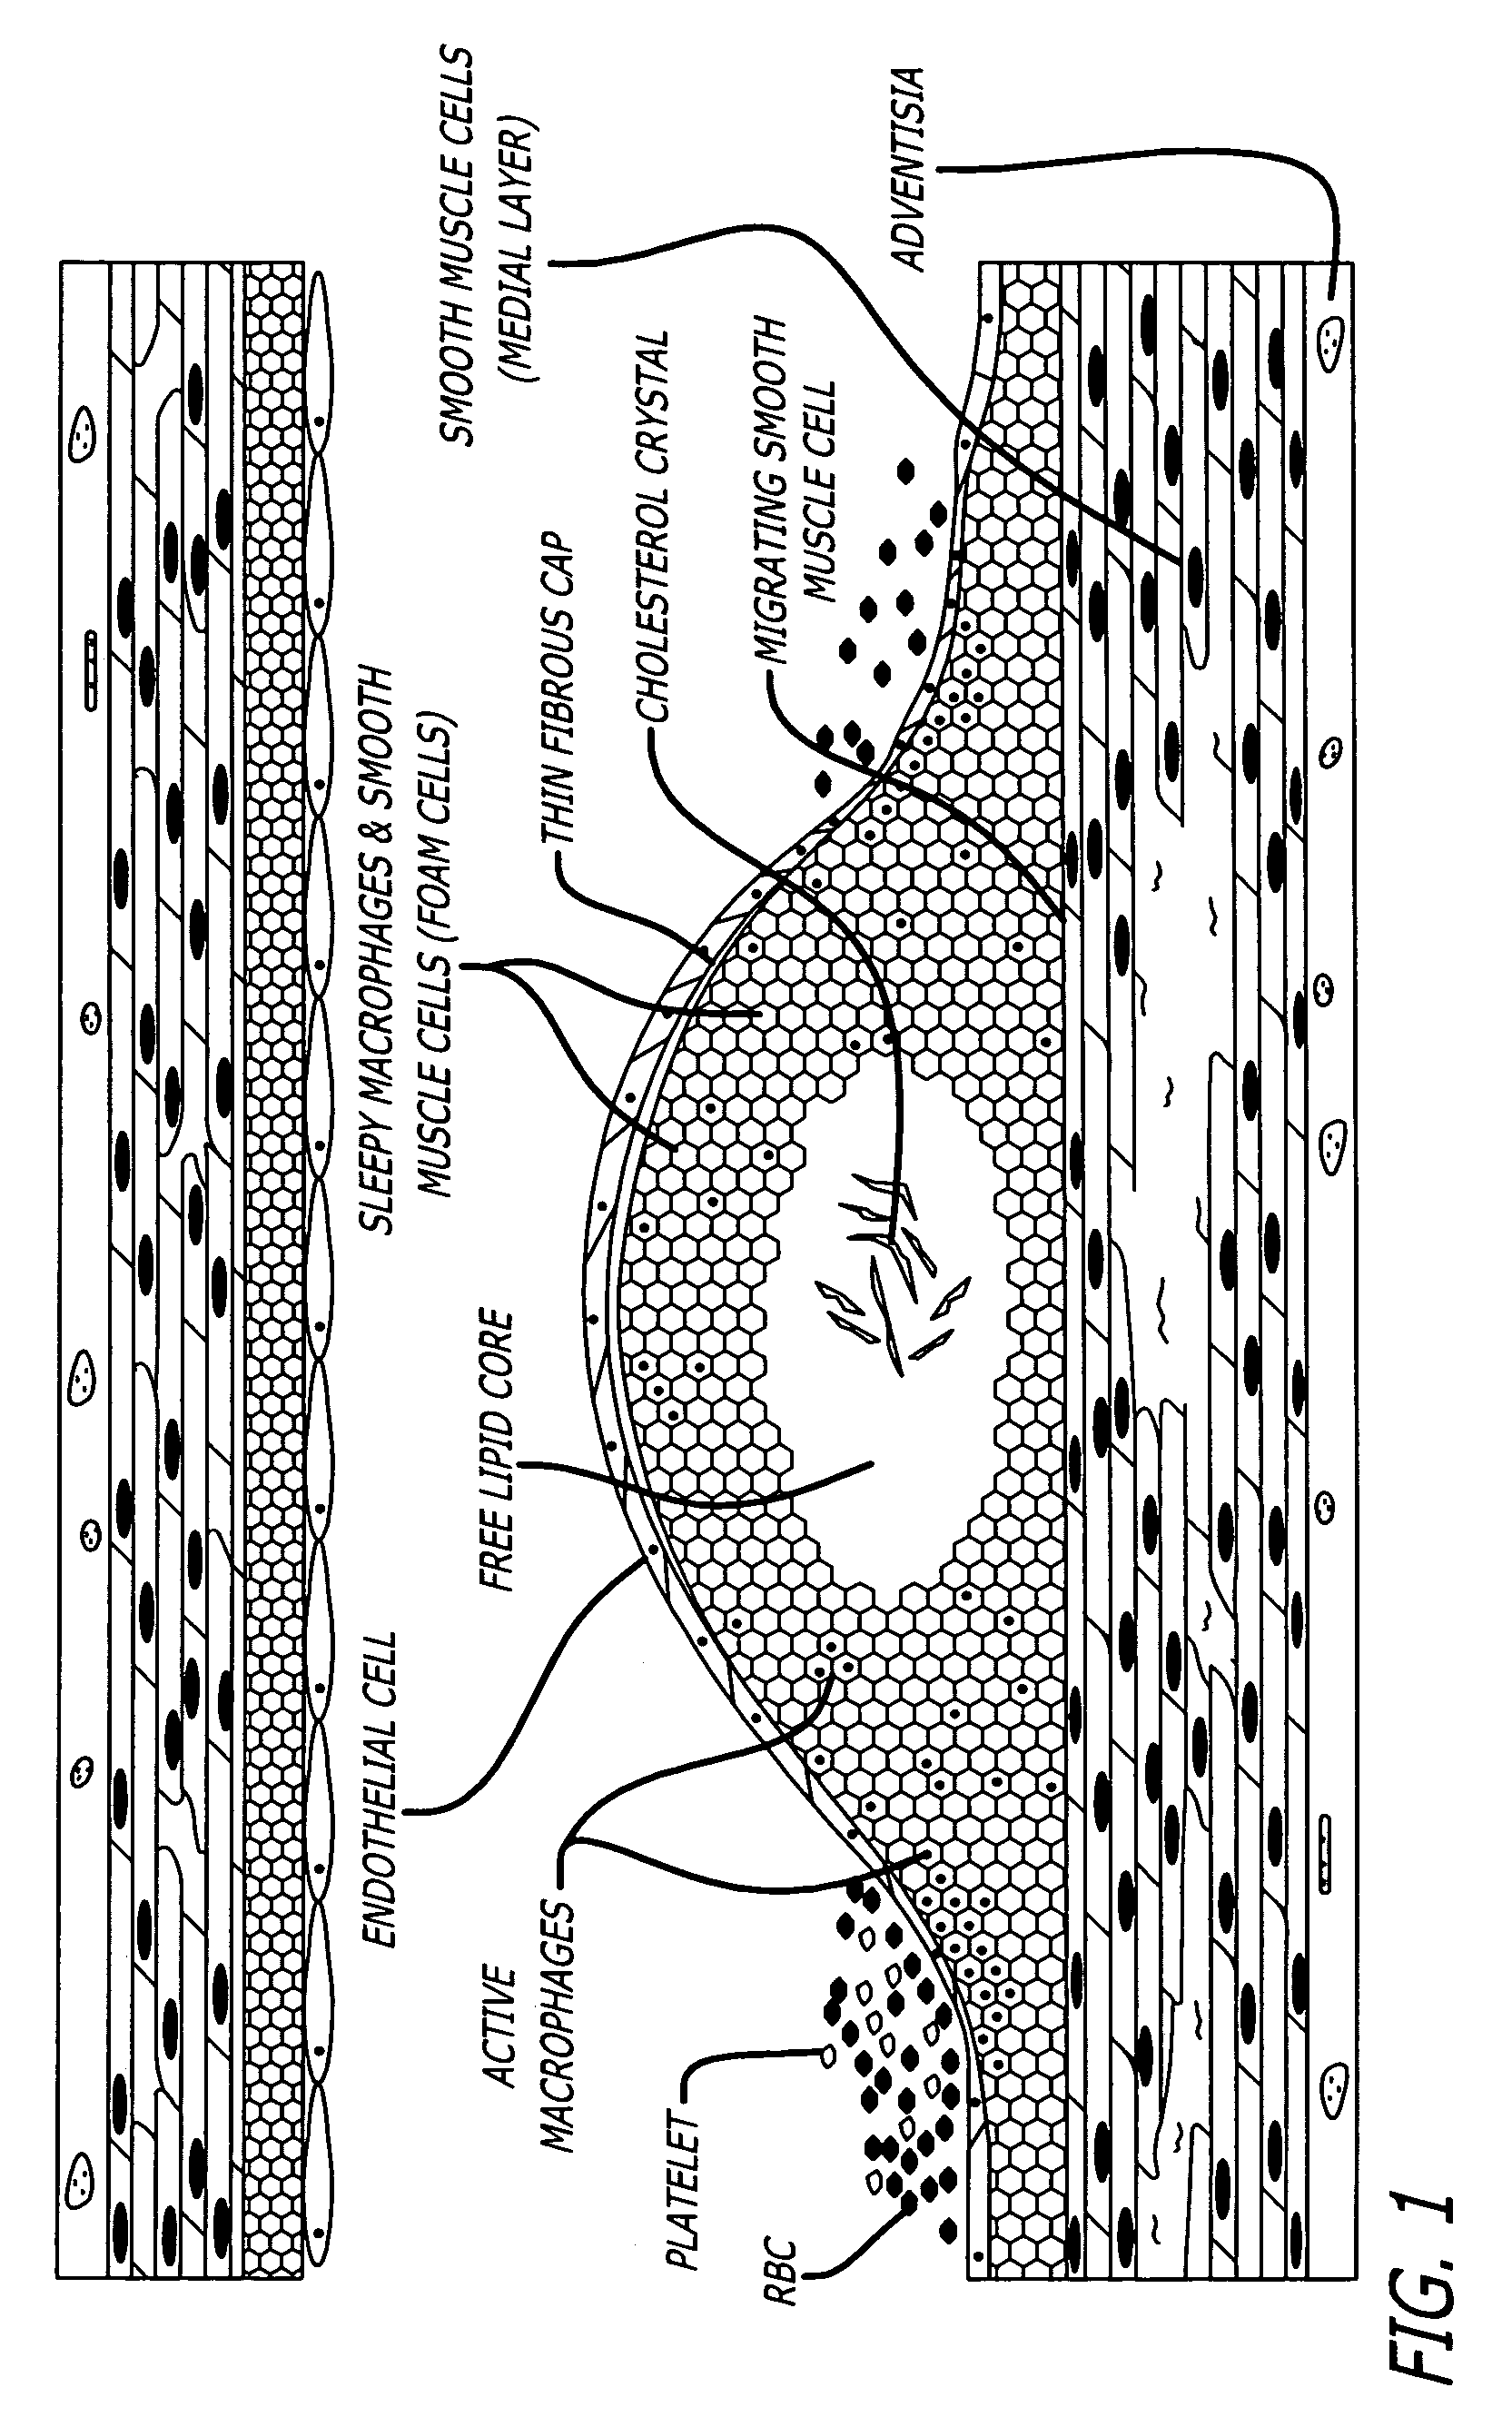 Method and apparatus for detection of vulnerable atherosclerotic plaque